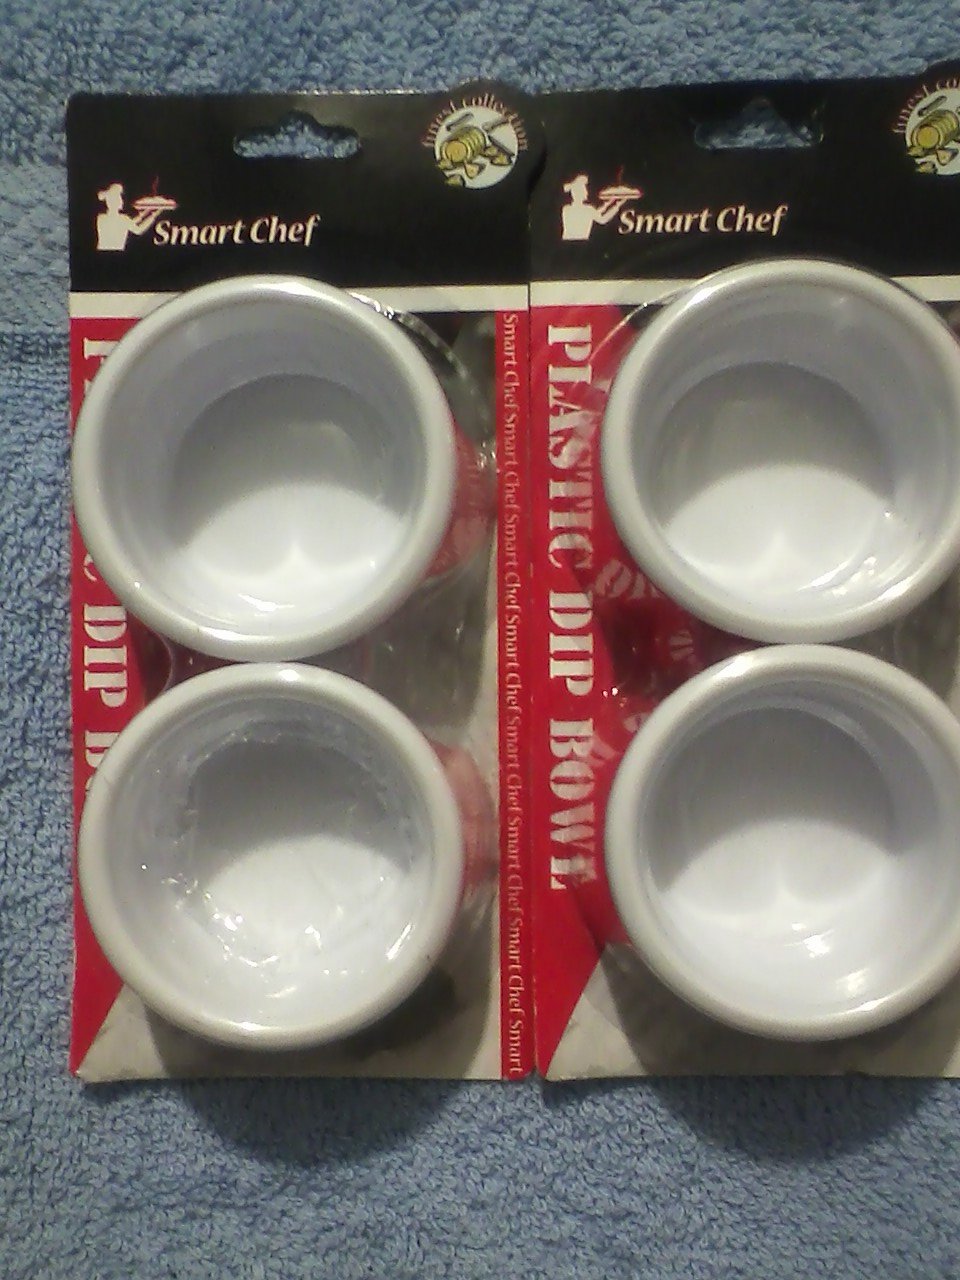 4 Smart Chef white plastic dip bowls. New in the packaging.